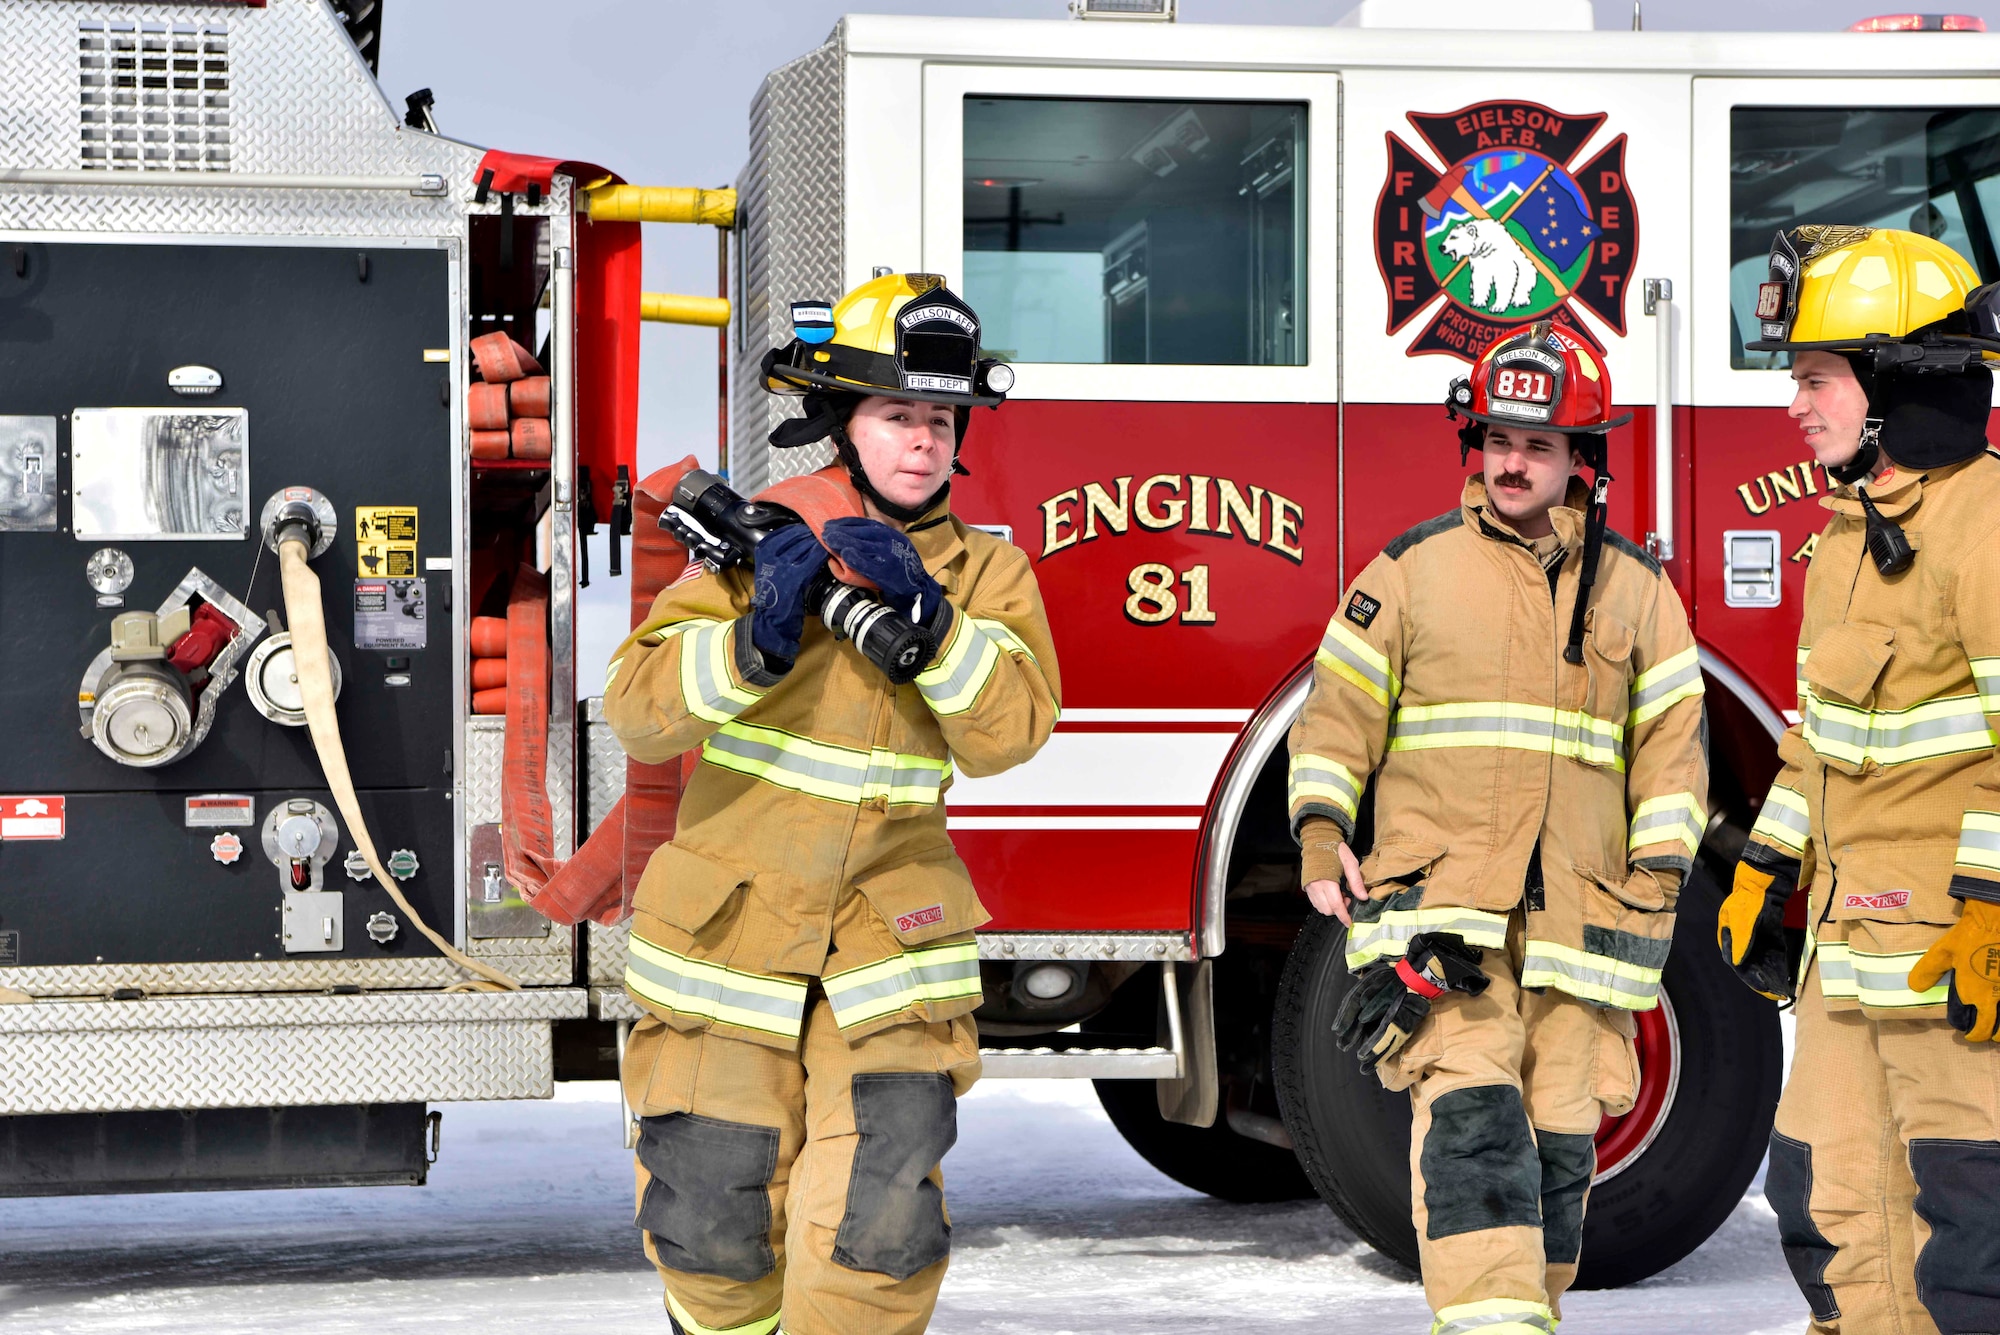 Airman Lily Lane, a 354th Civil Engineer Squadron firefighter, pulls a hose from a fire truck as part of a training exercise on Eielson Air Force Base, Alaska, March 26, 2020. Eielson firefighters conduct routine walk-throughs of installation facilities to ensure a more rapid response in case of an emergency situation. (U.S. Air Force photo by Senior Airman Beaux Hebert)